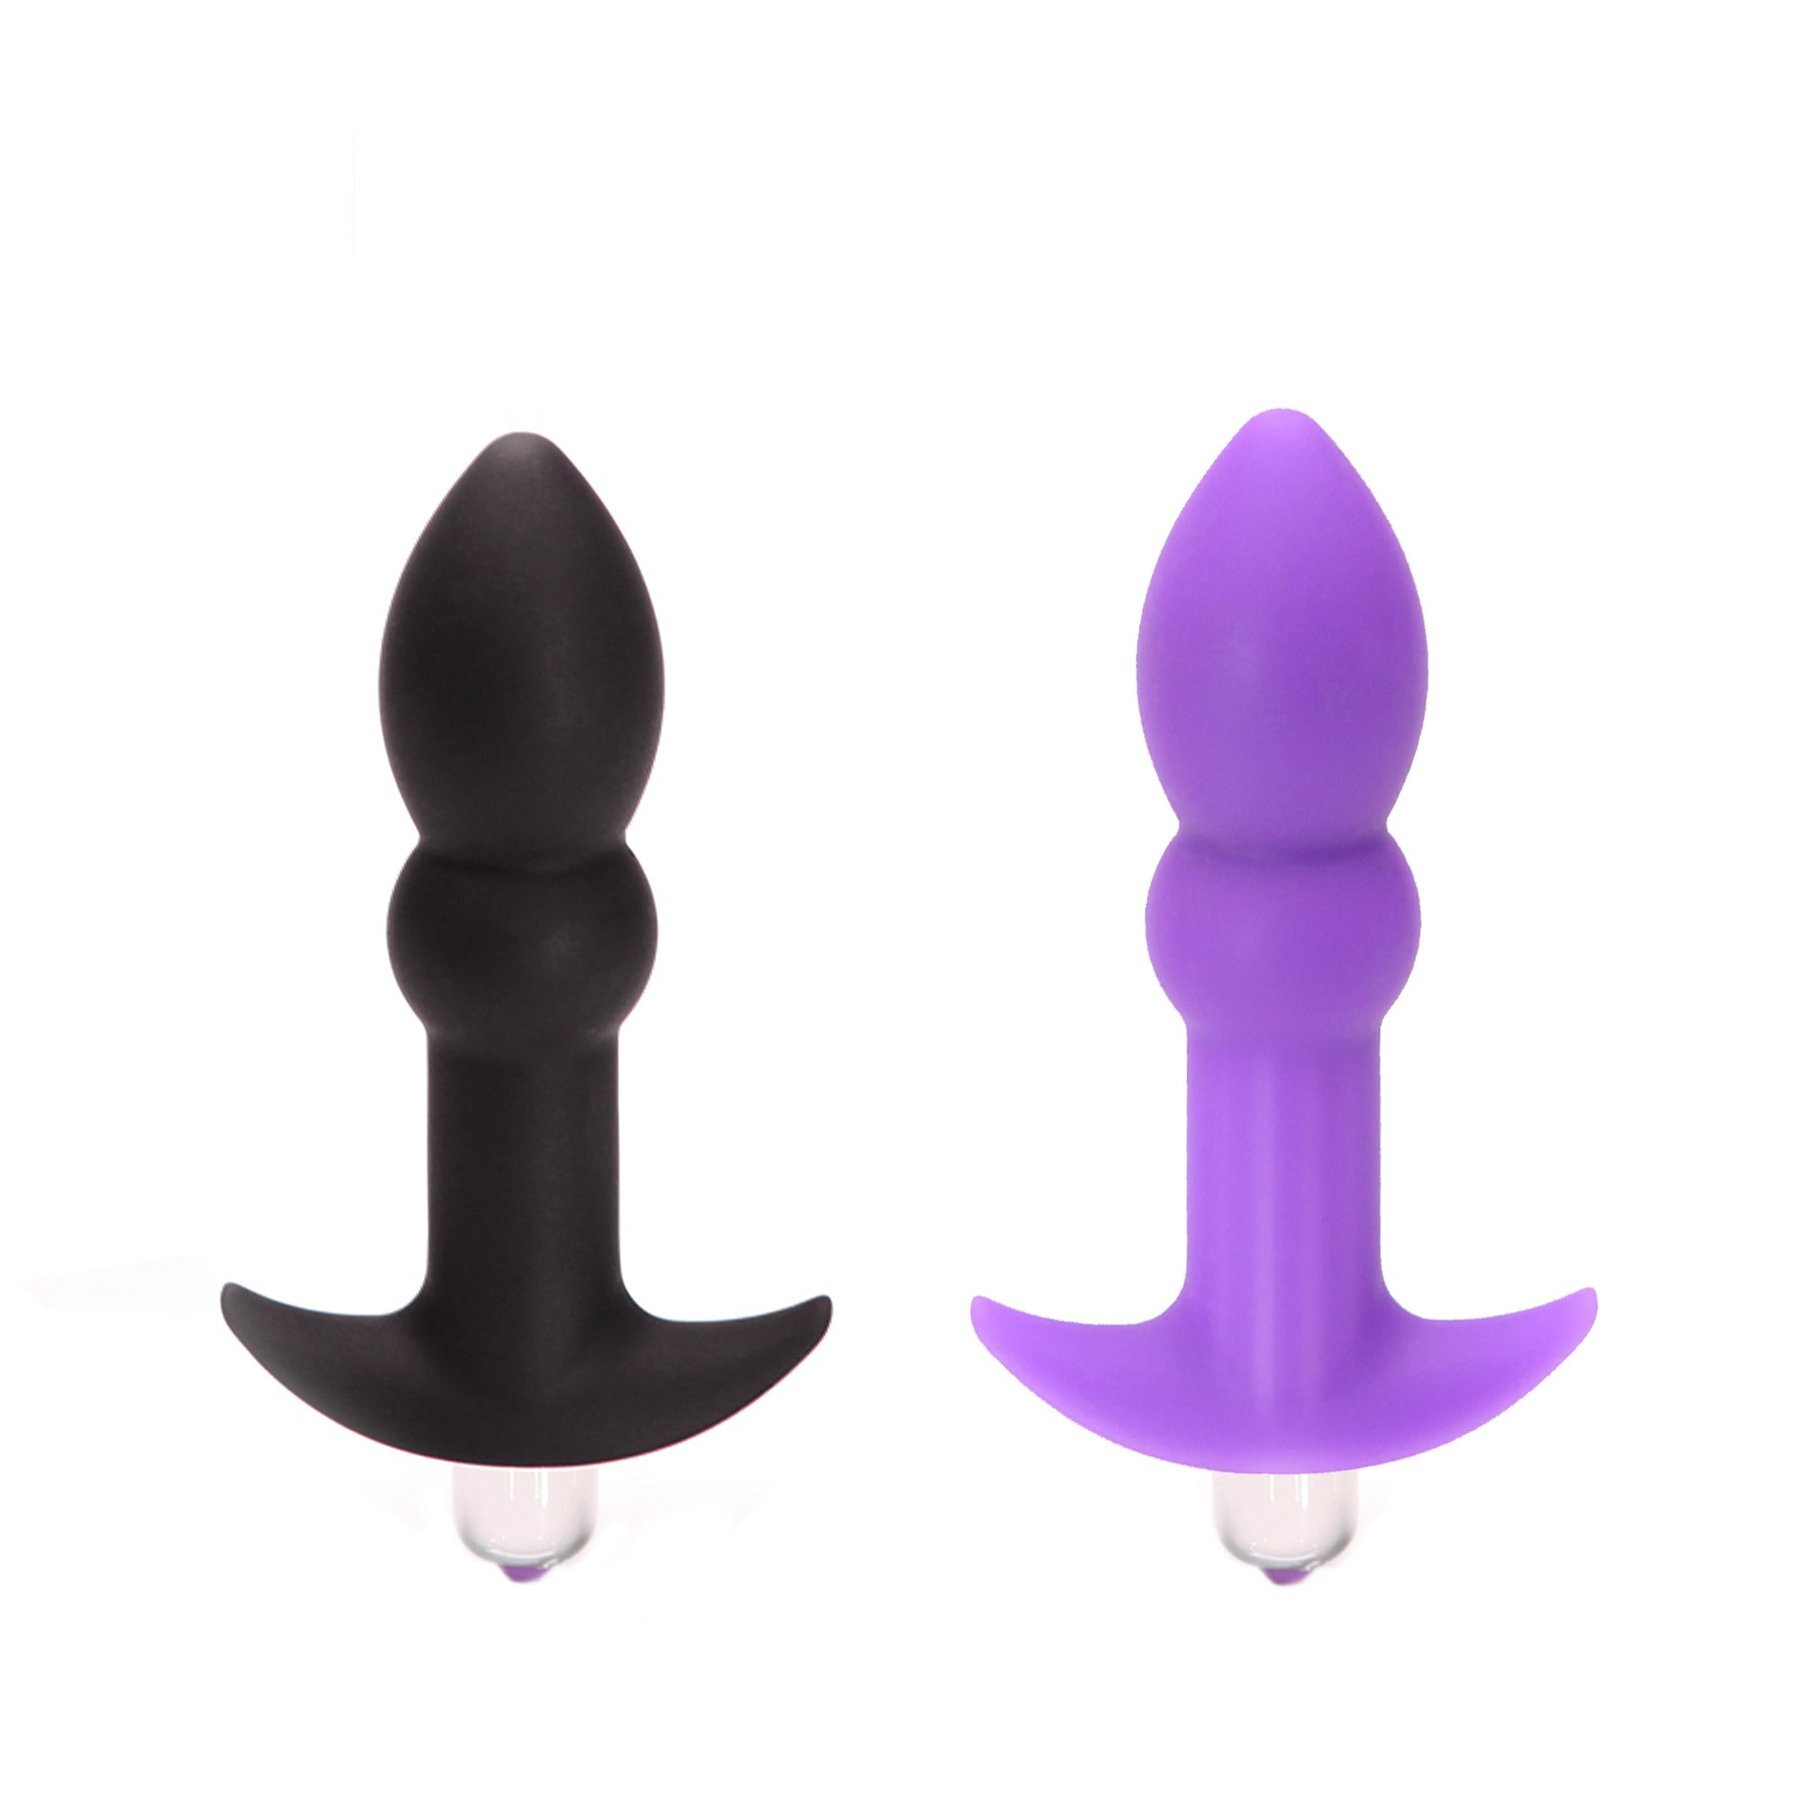 Perfect Plug Plus by Tantus (online store)